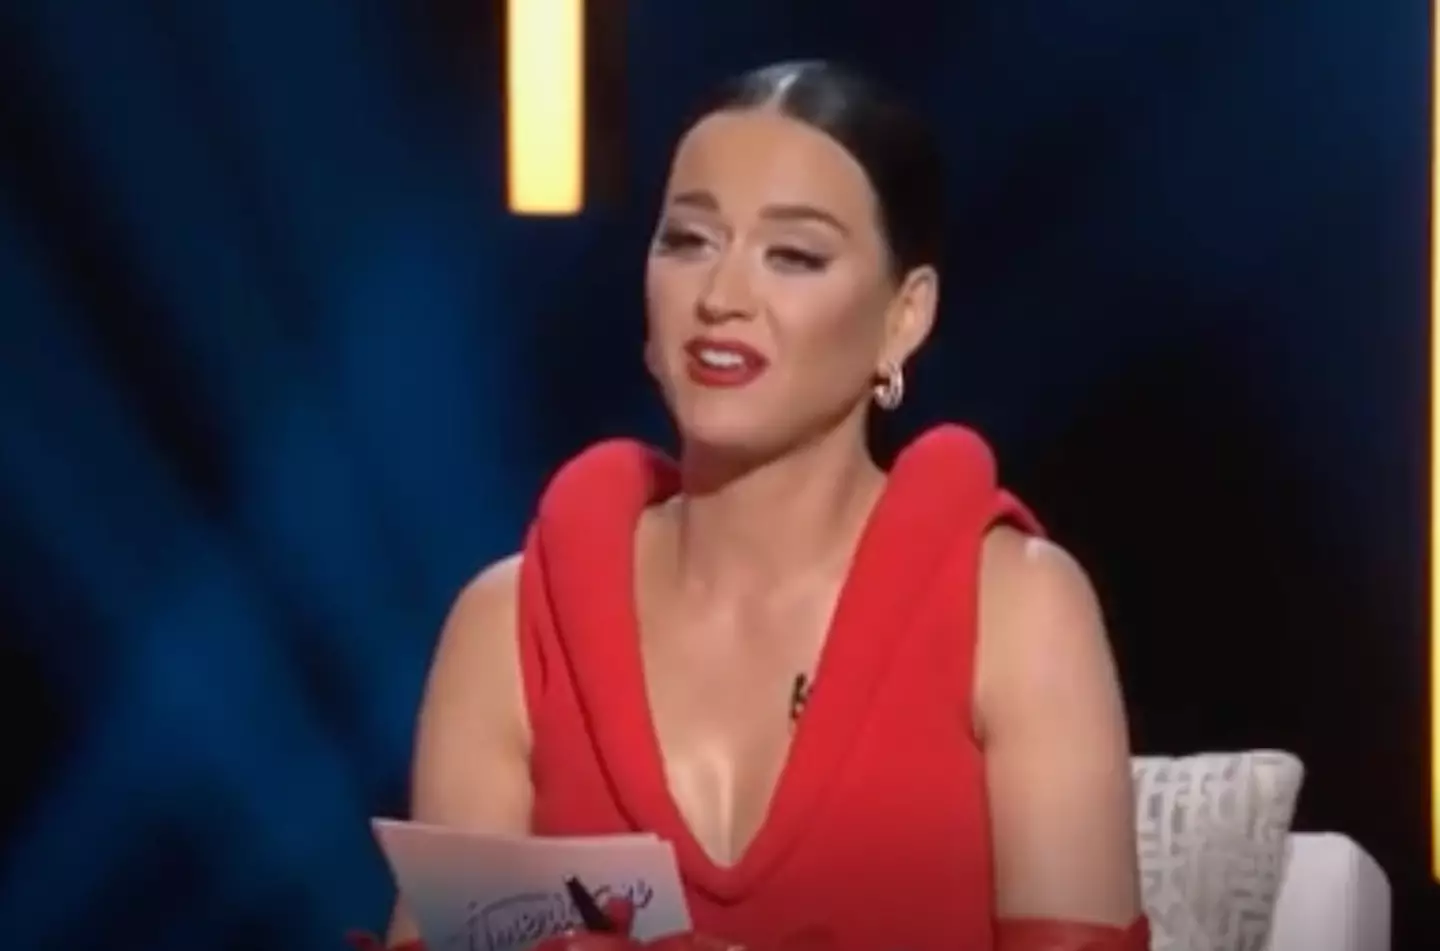 Viewers have called out Katy Perry.